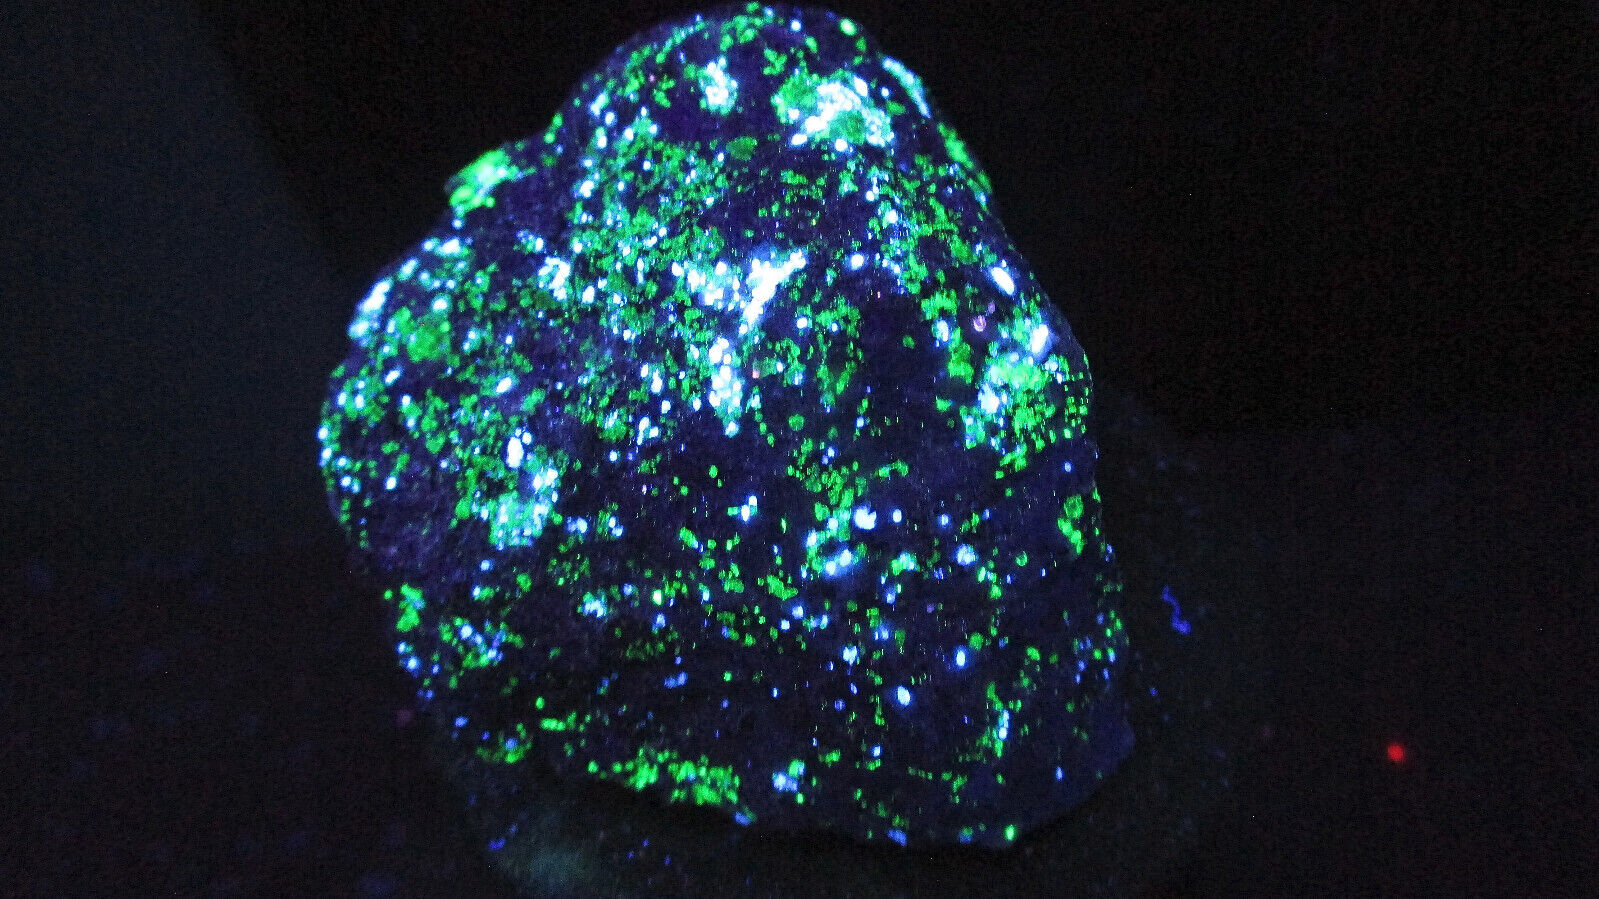 “Starry Night” with Rare White Willemite fluorescent mineral rock Franklin O61